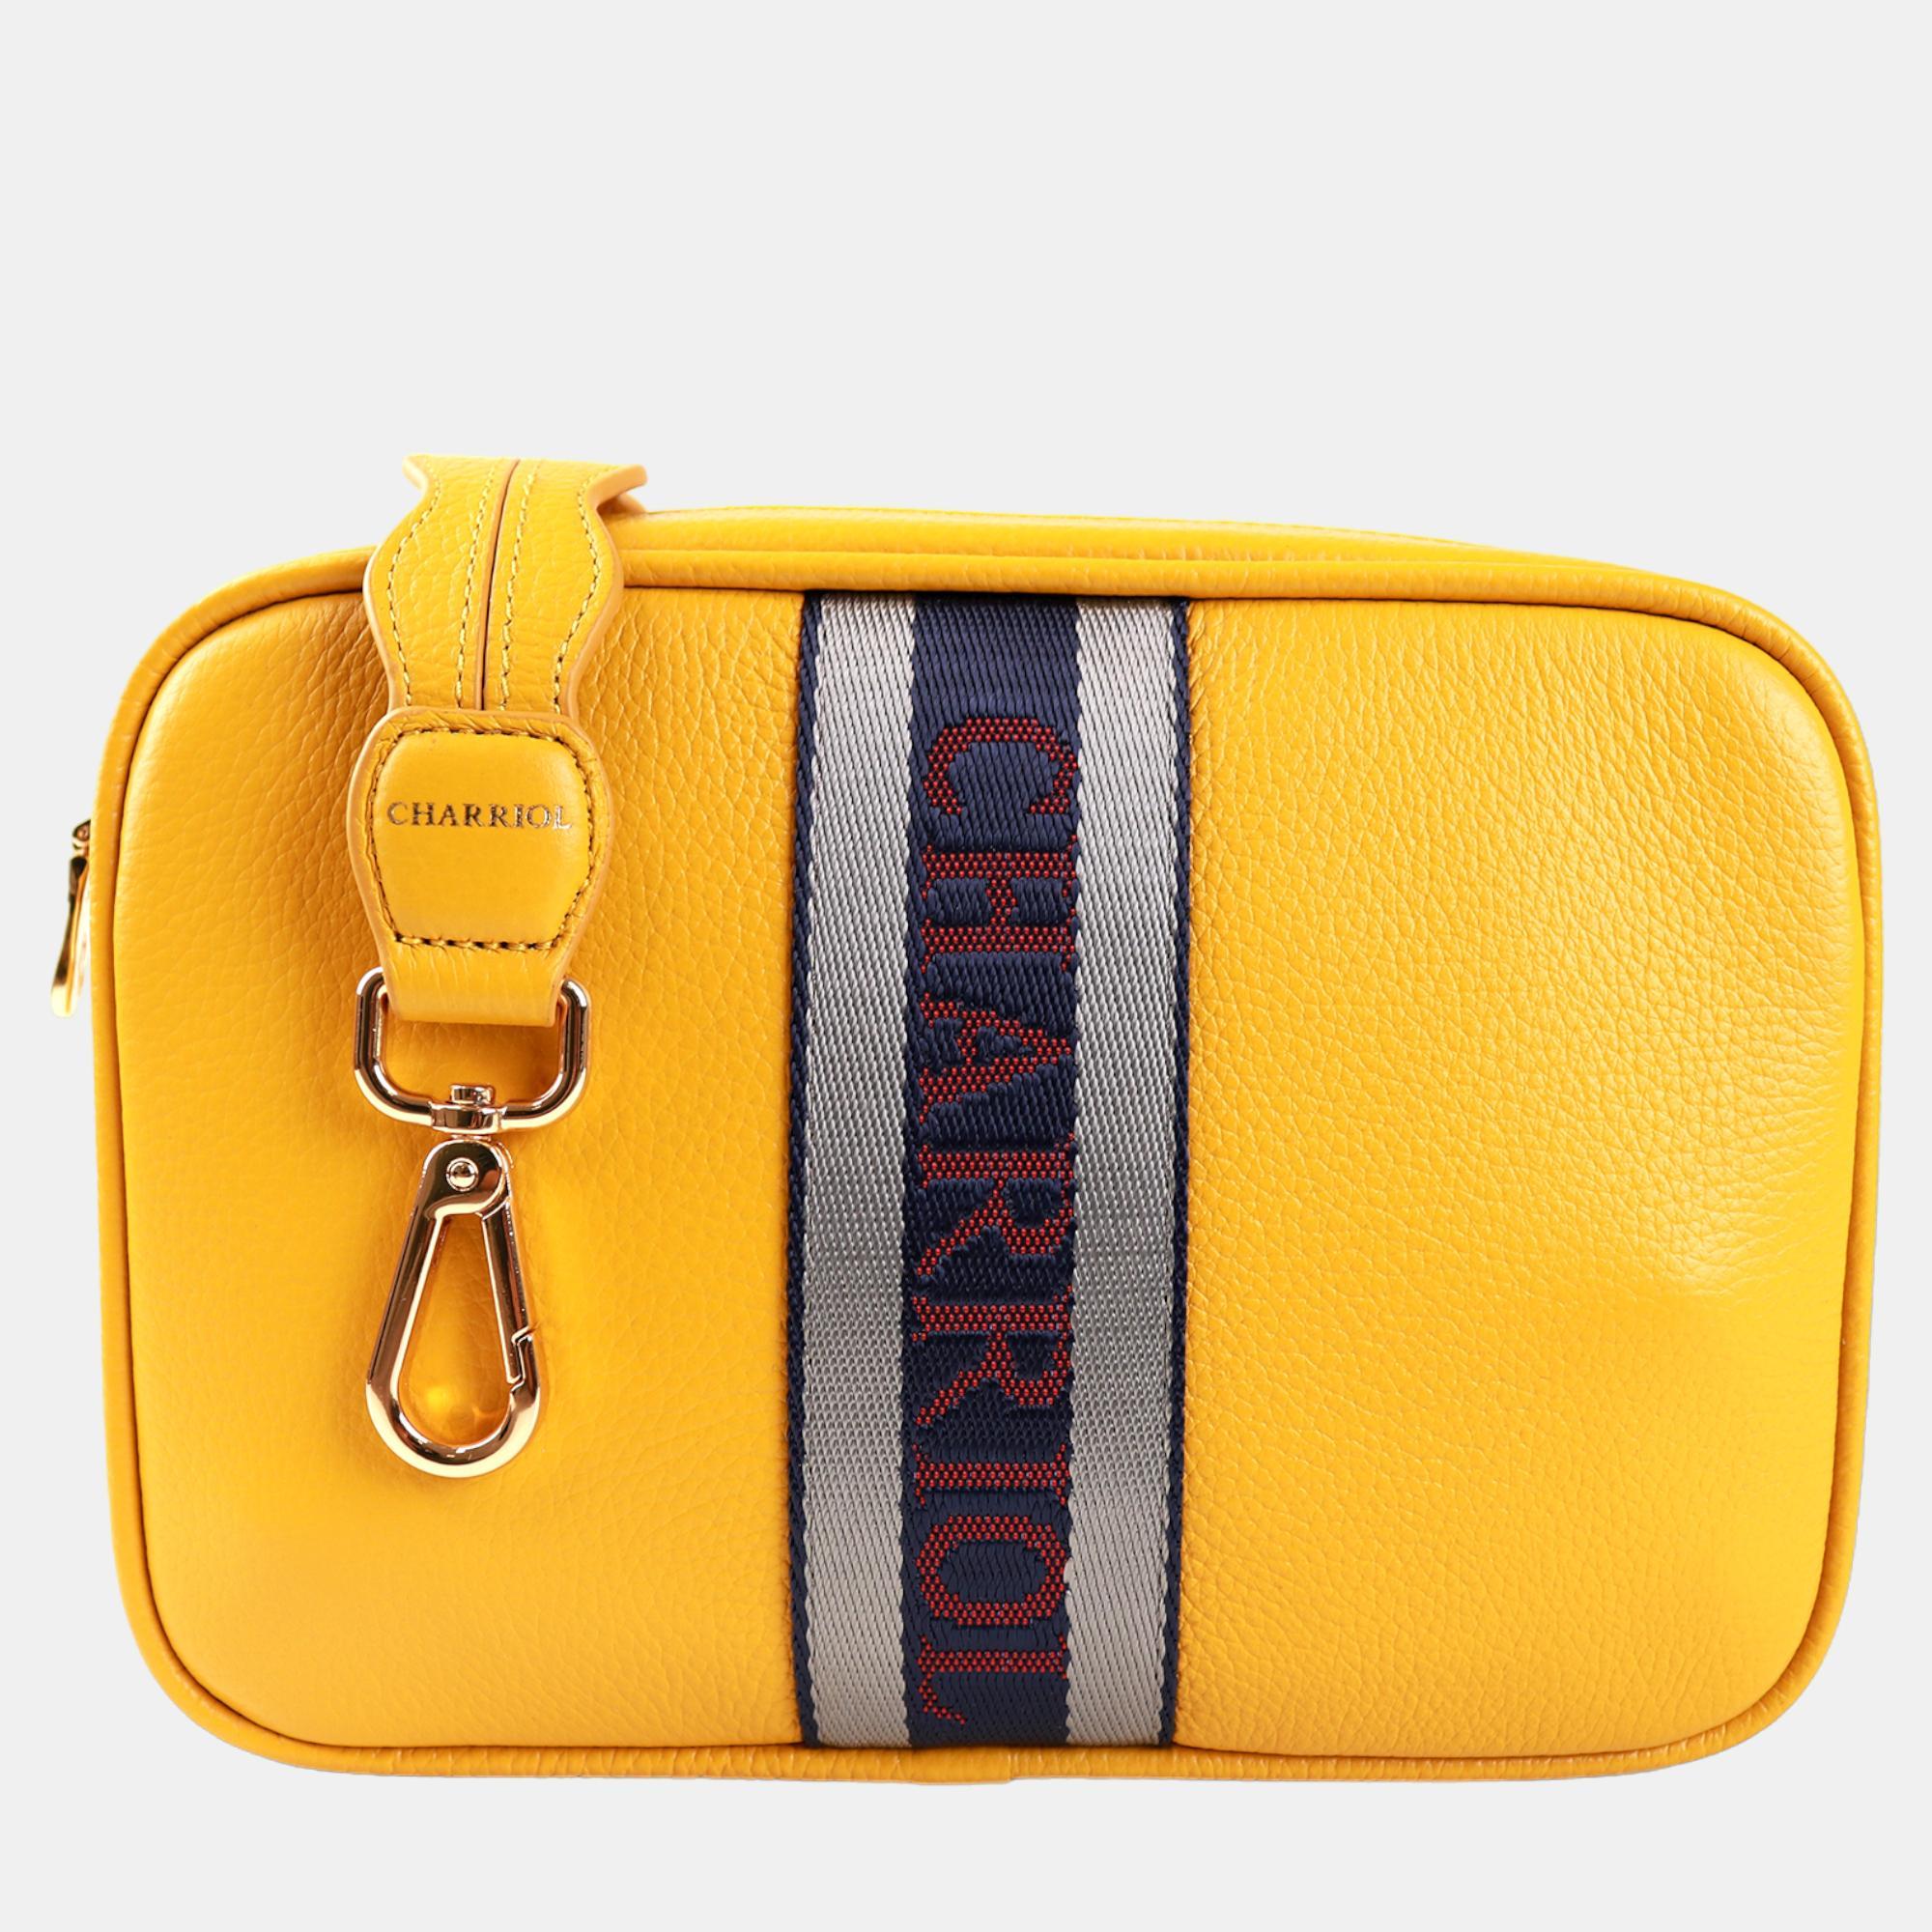 Pre-owned Charriol Yellow Leather Deauville Crossbody